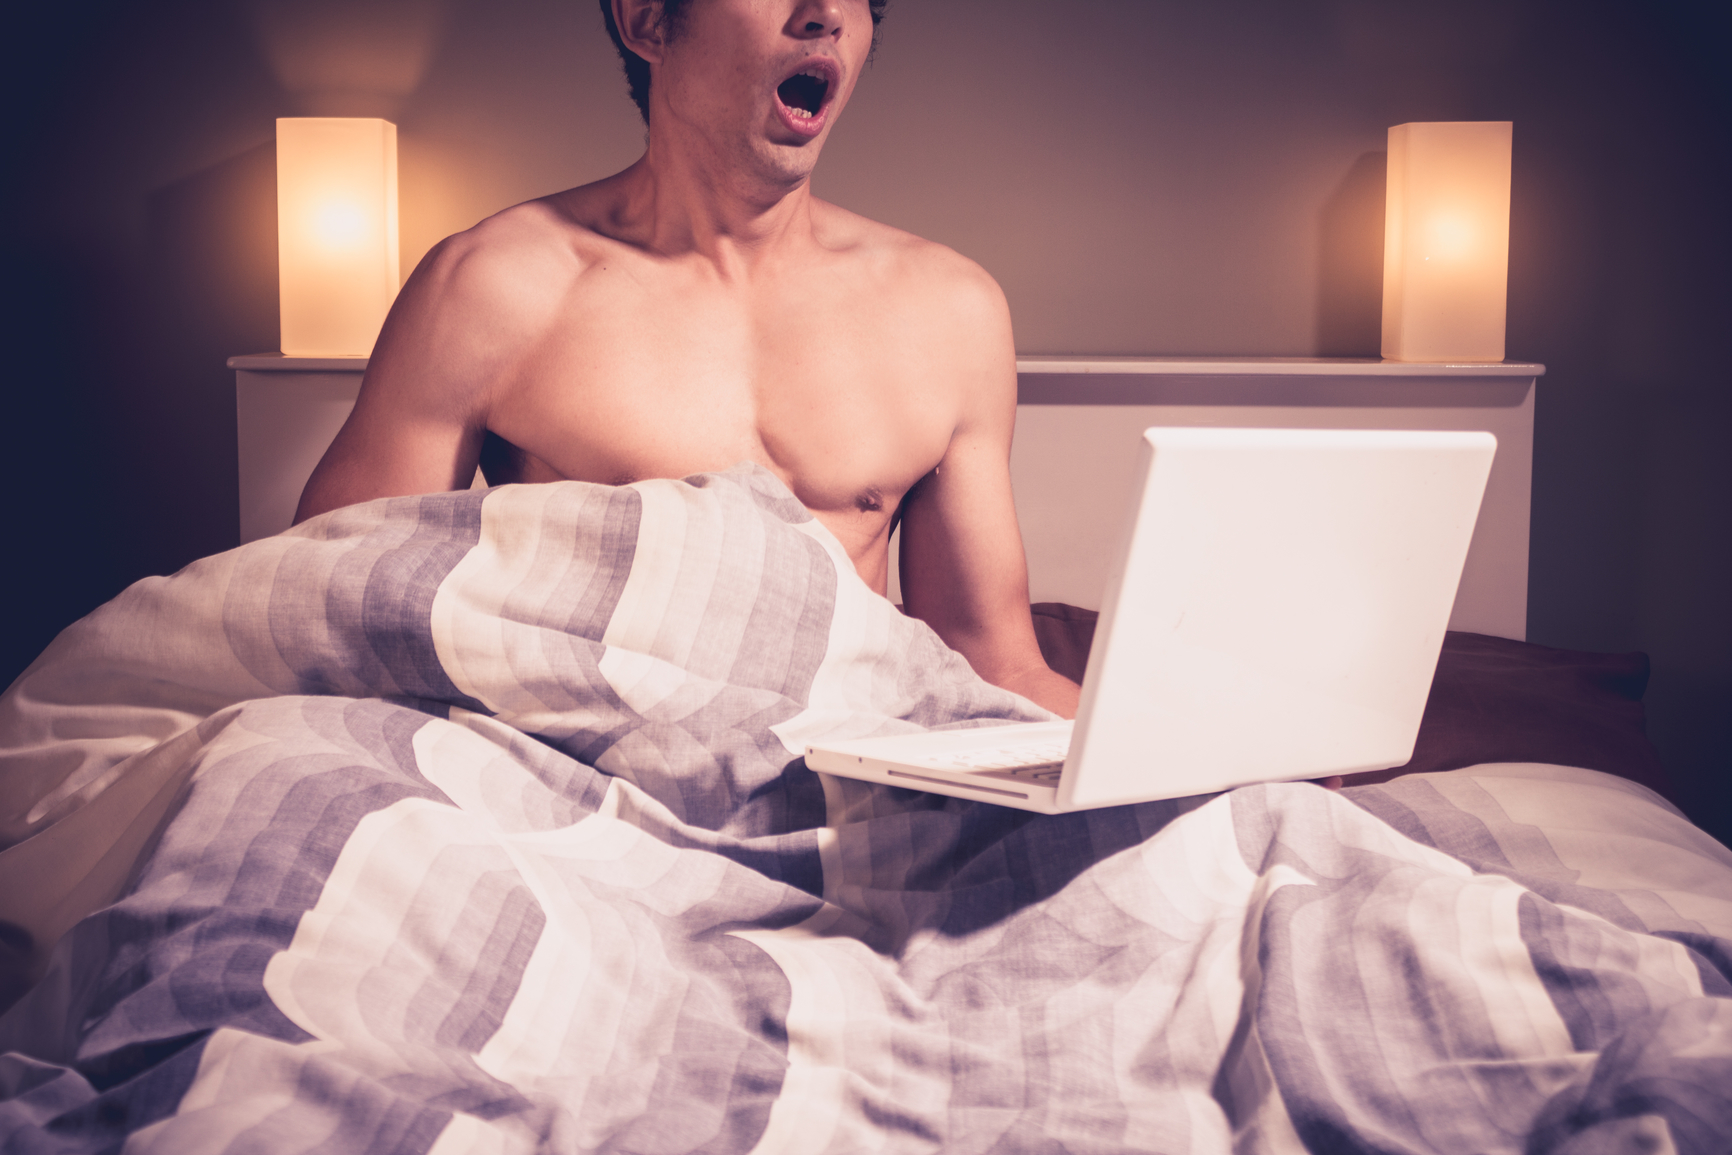 Young man is sitting in bed and watching pornography on laptop 1732 x 1155